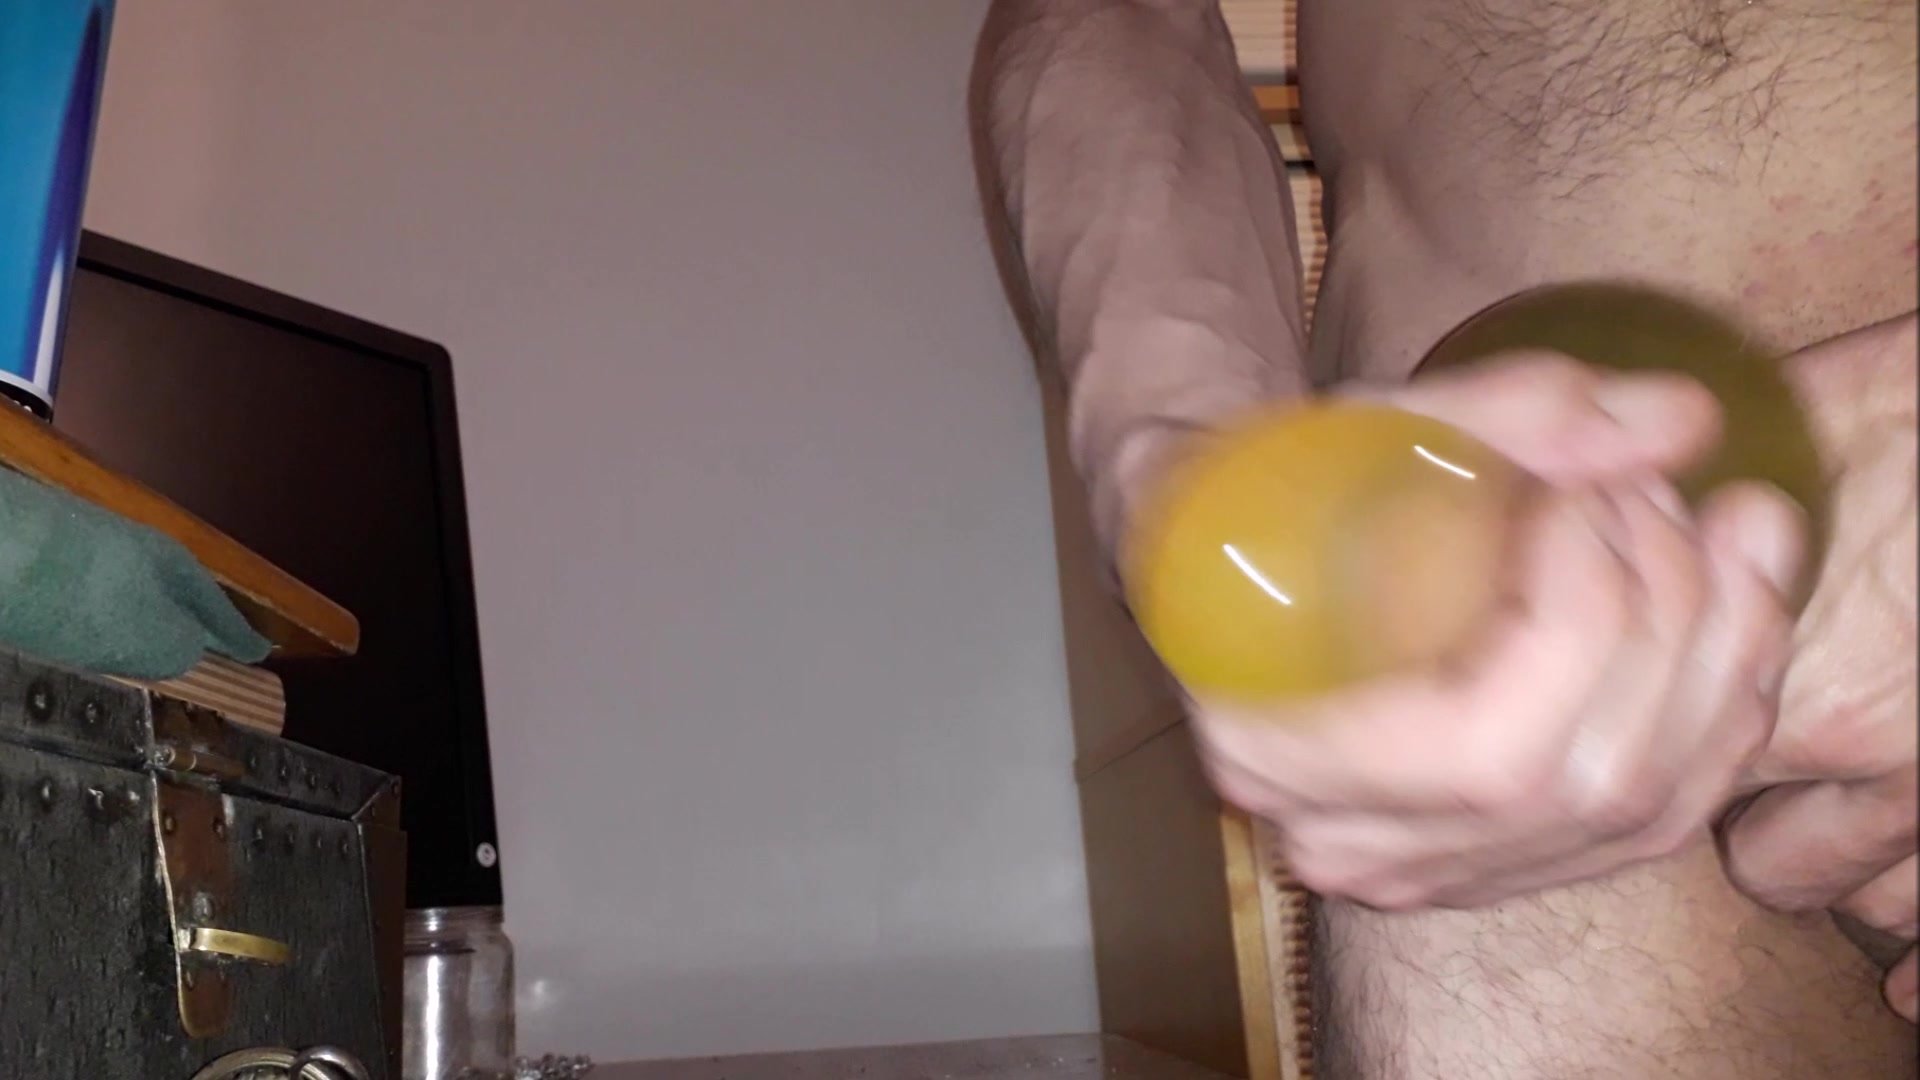 Condom full of piss is used for wanking! Cum inside!!!